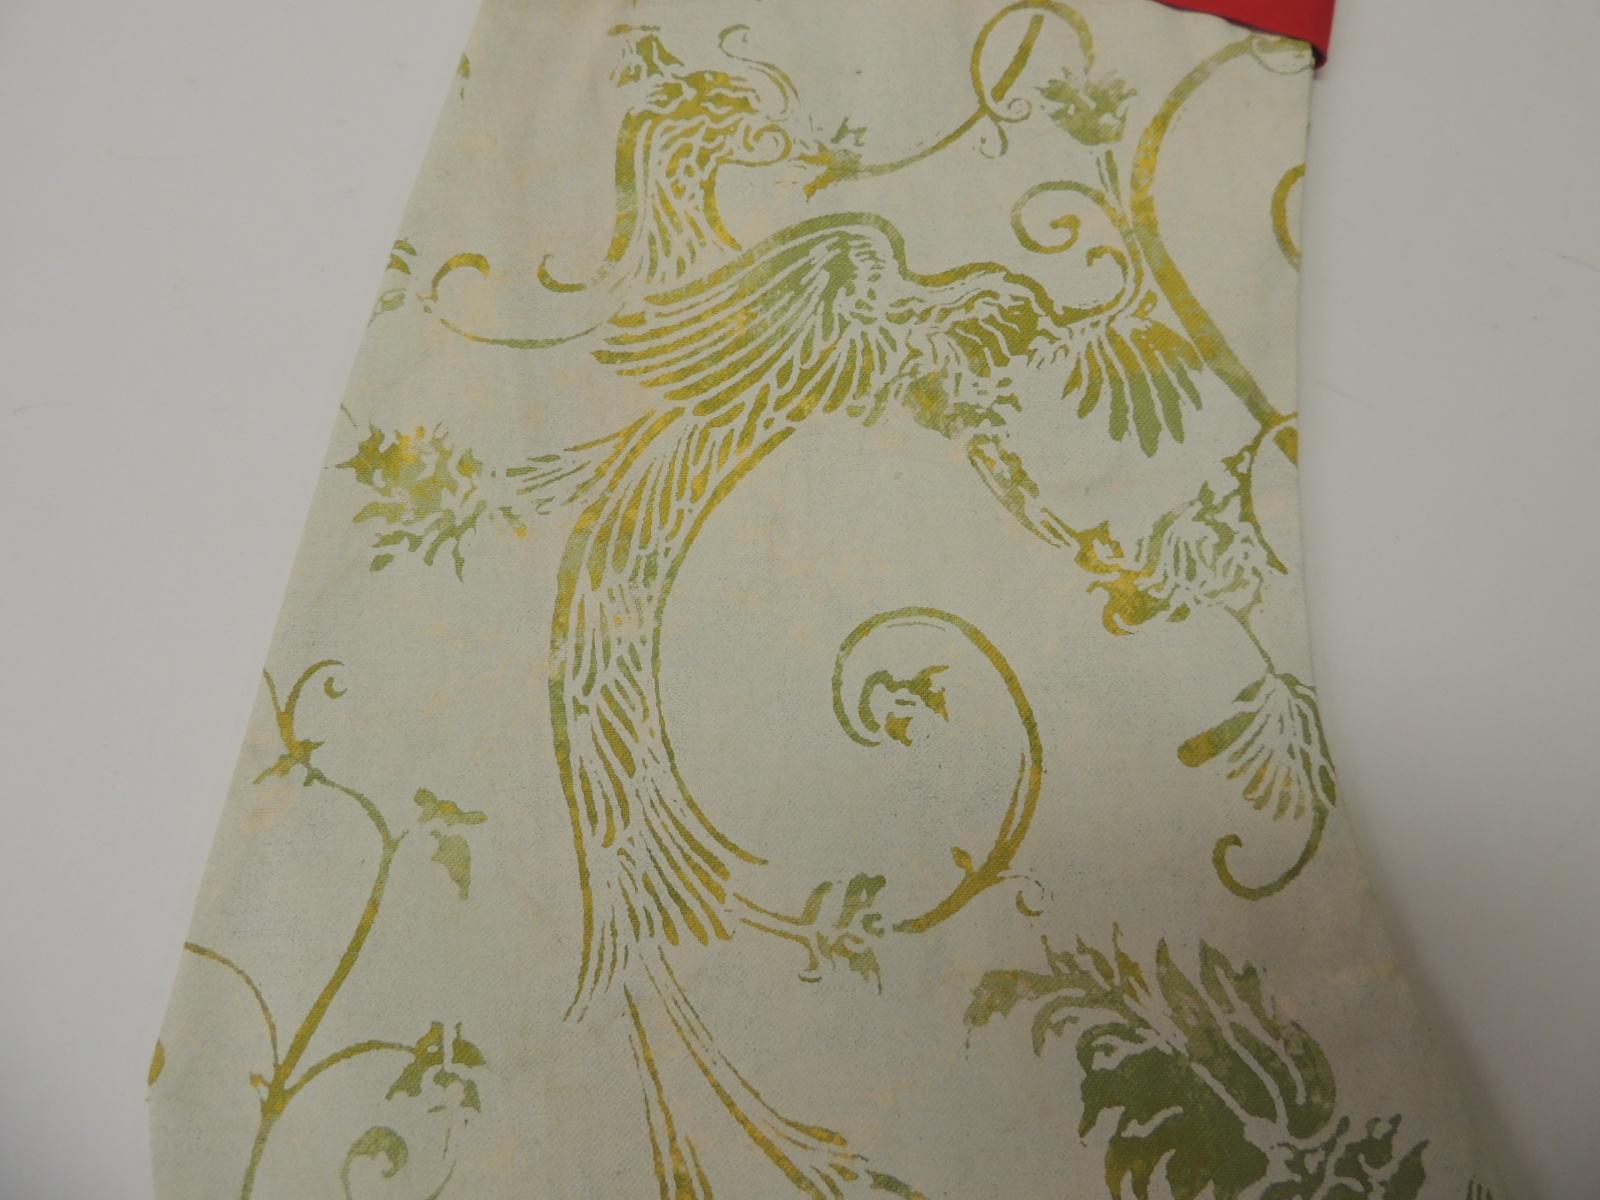 Artisanal holiday gift stocking.
Vintage Fortuny style screen printed in the USA, depicting birds of paradise and vines.
Doubled-sided, embellished with cotton red ribbon same as hanging hook.
Interlined with cotton fabric. Custom made and